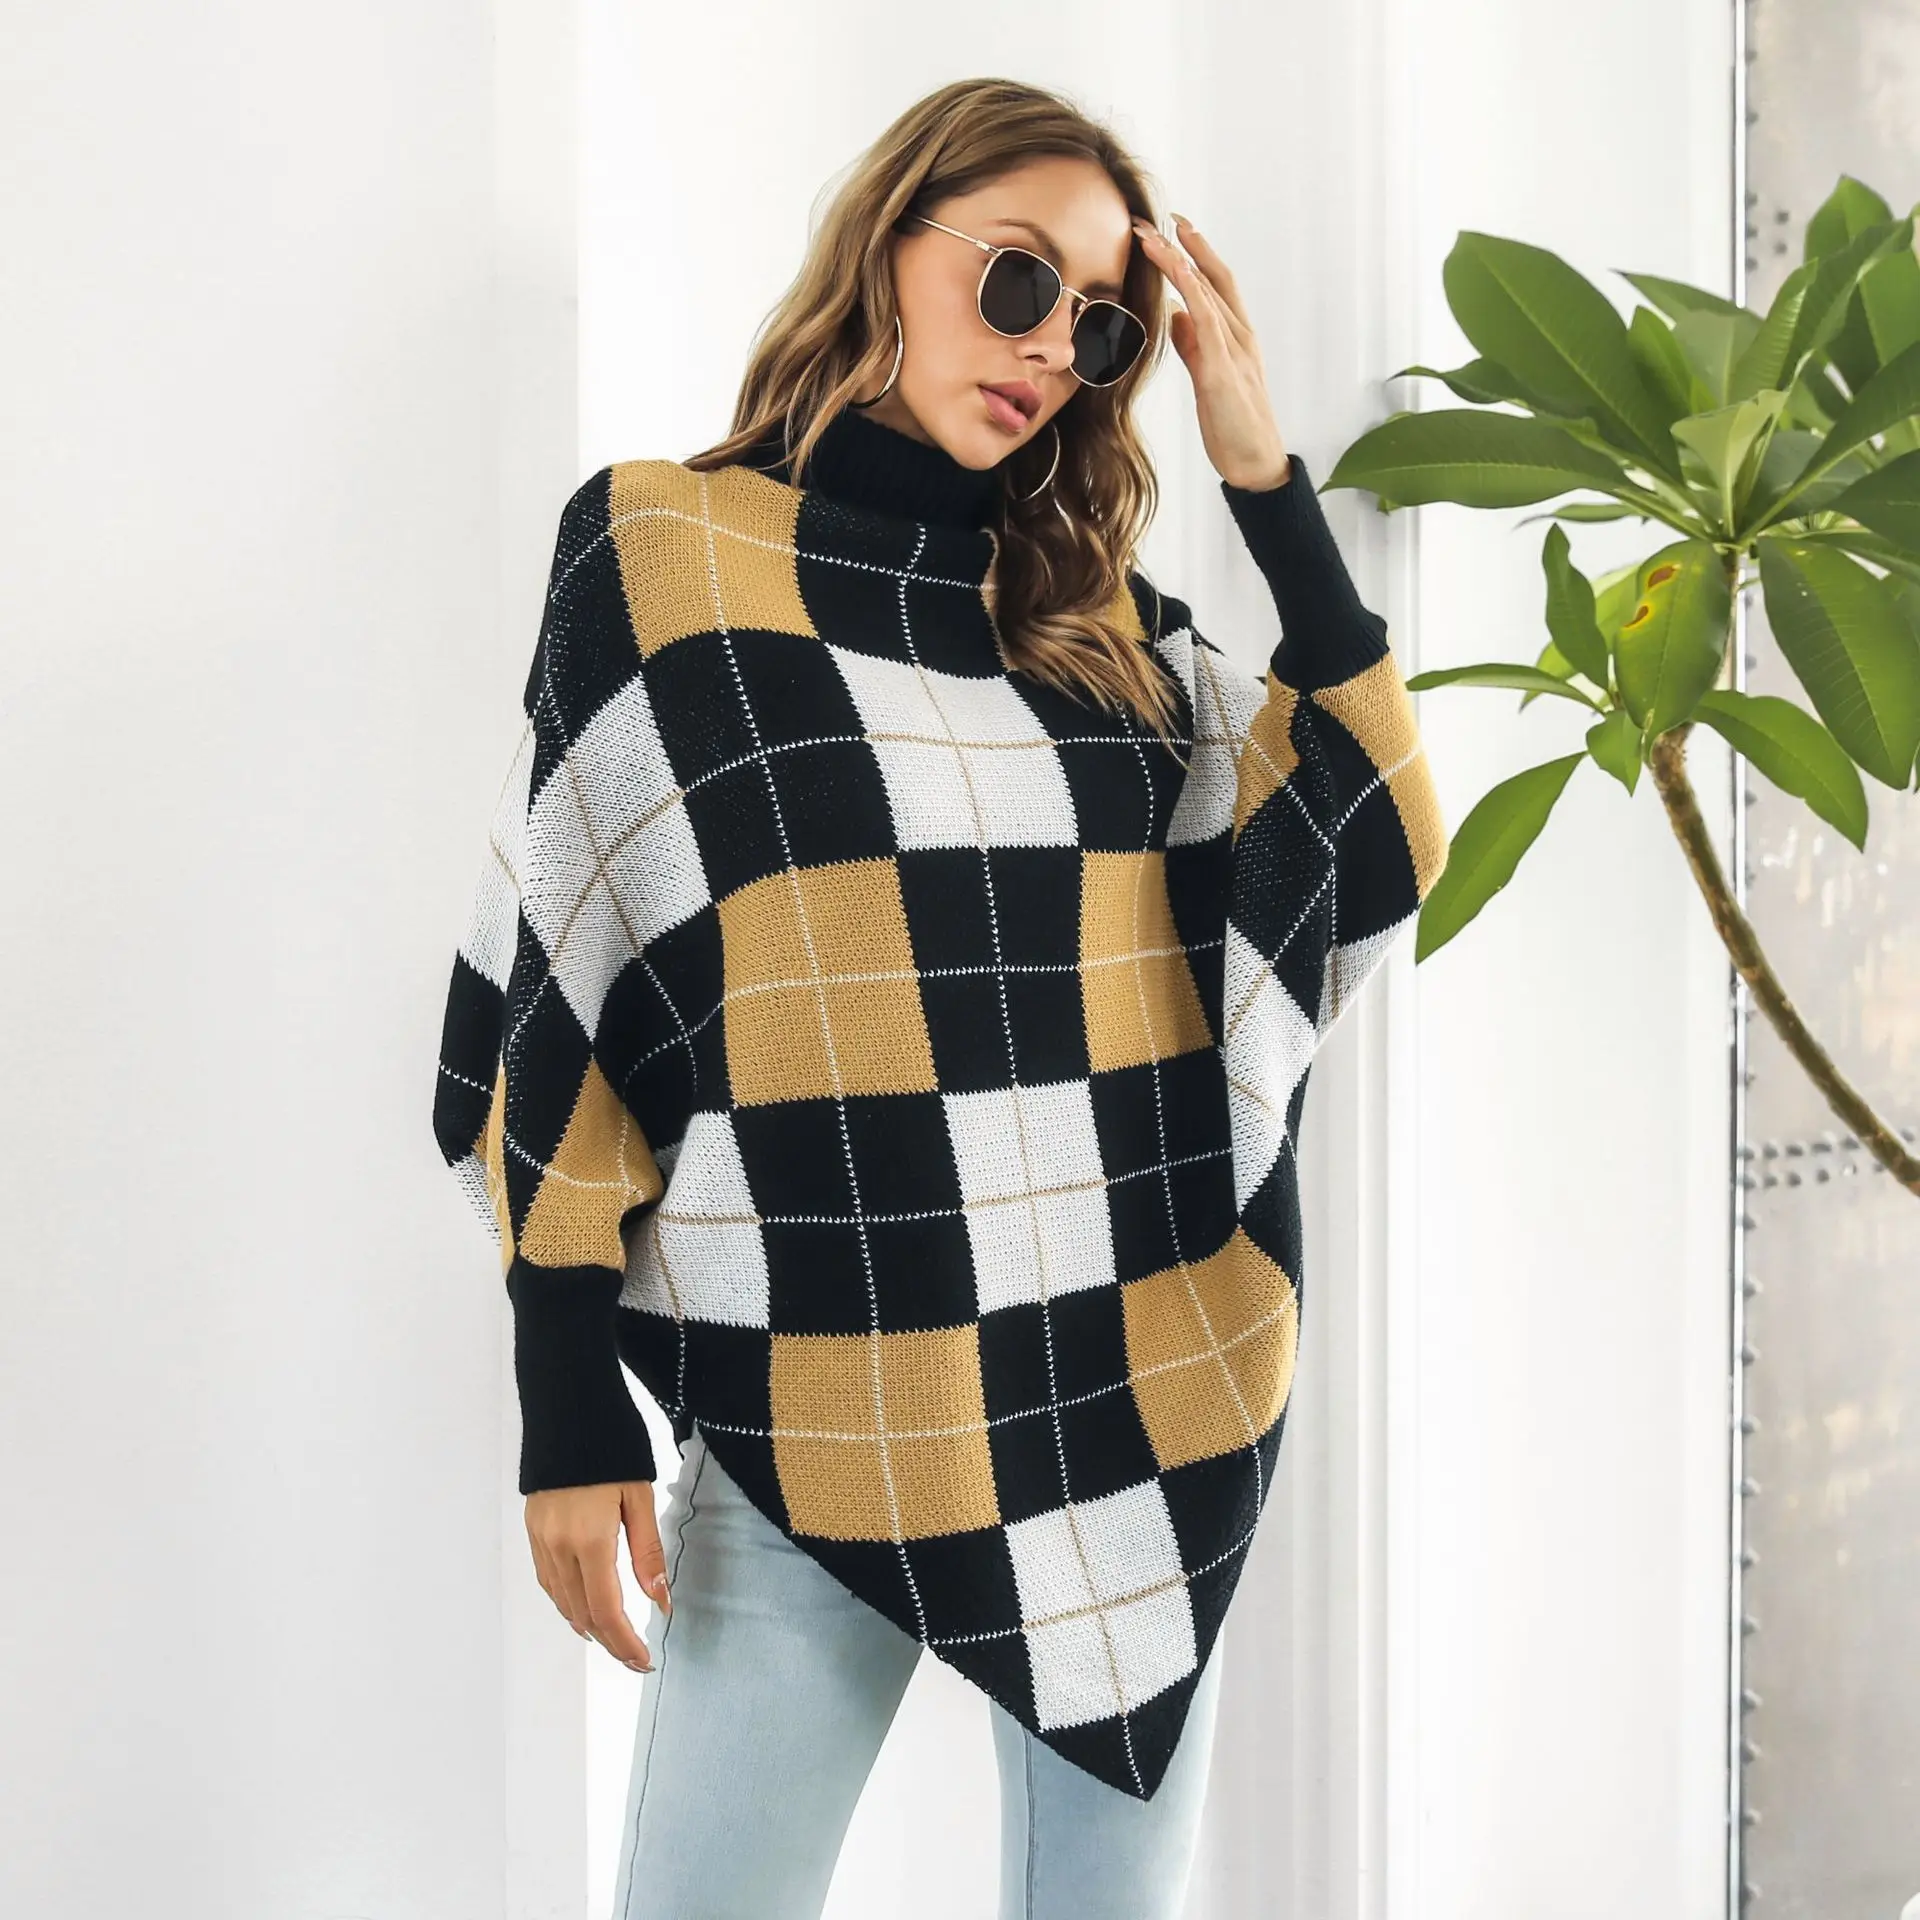 

Women Casual Plaid Jacquard Cloak Knitted Sweater Long Bat Sleeve Pullover New Autumn Winter Basic Y2k Pull Tops Fashion Clothes